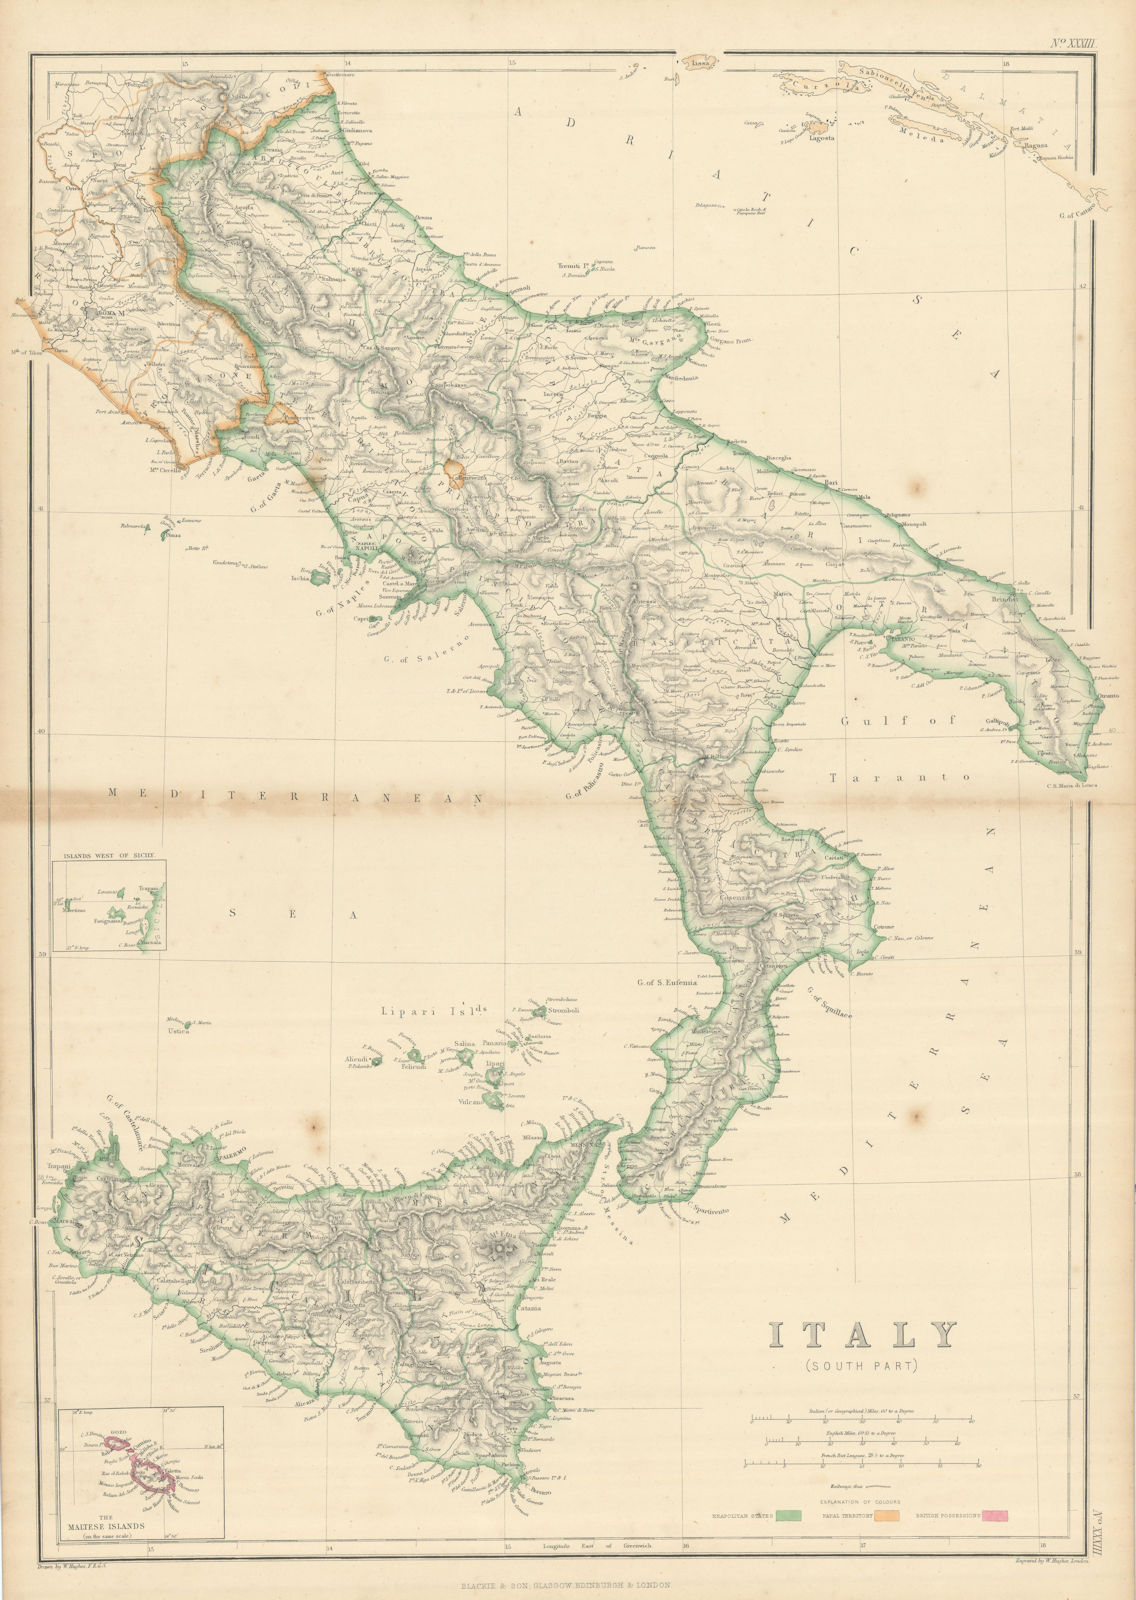 Southern Italy. Naples. Kingdom of the two Sicilies. By William Hughes 1860 map